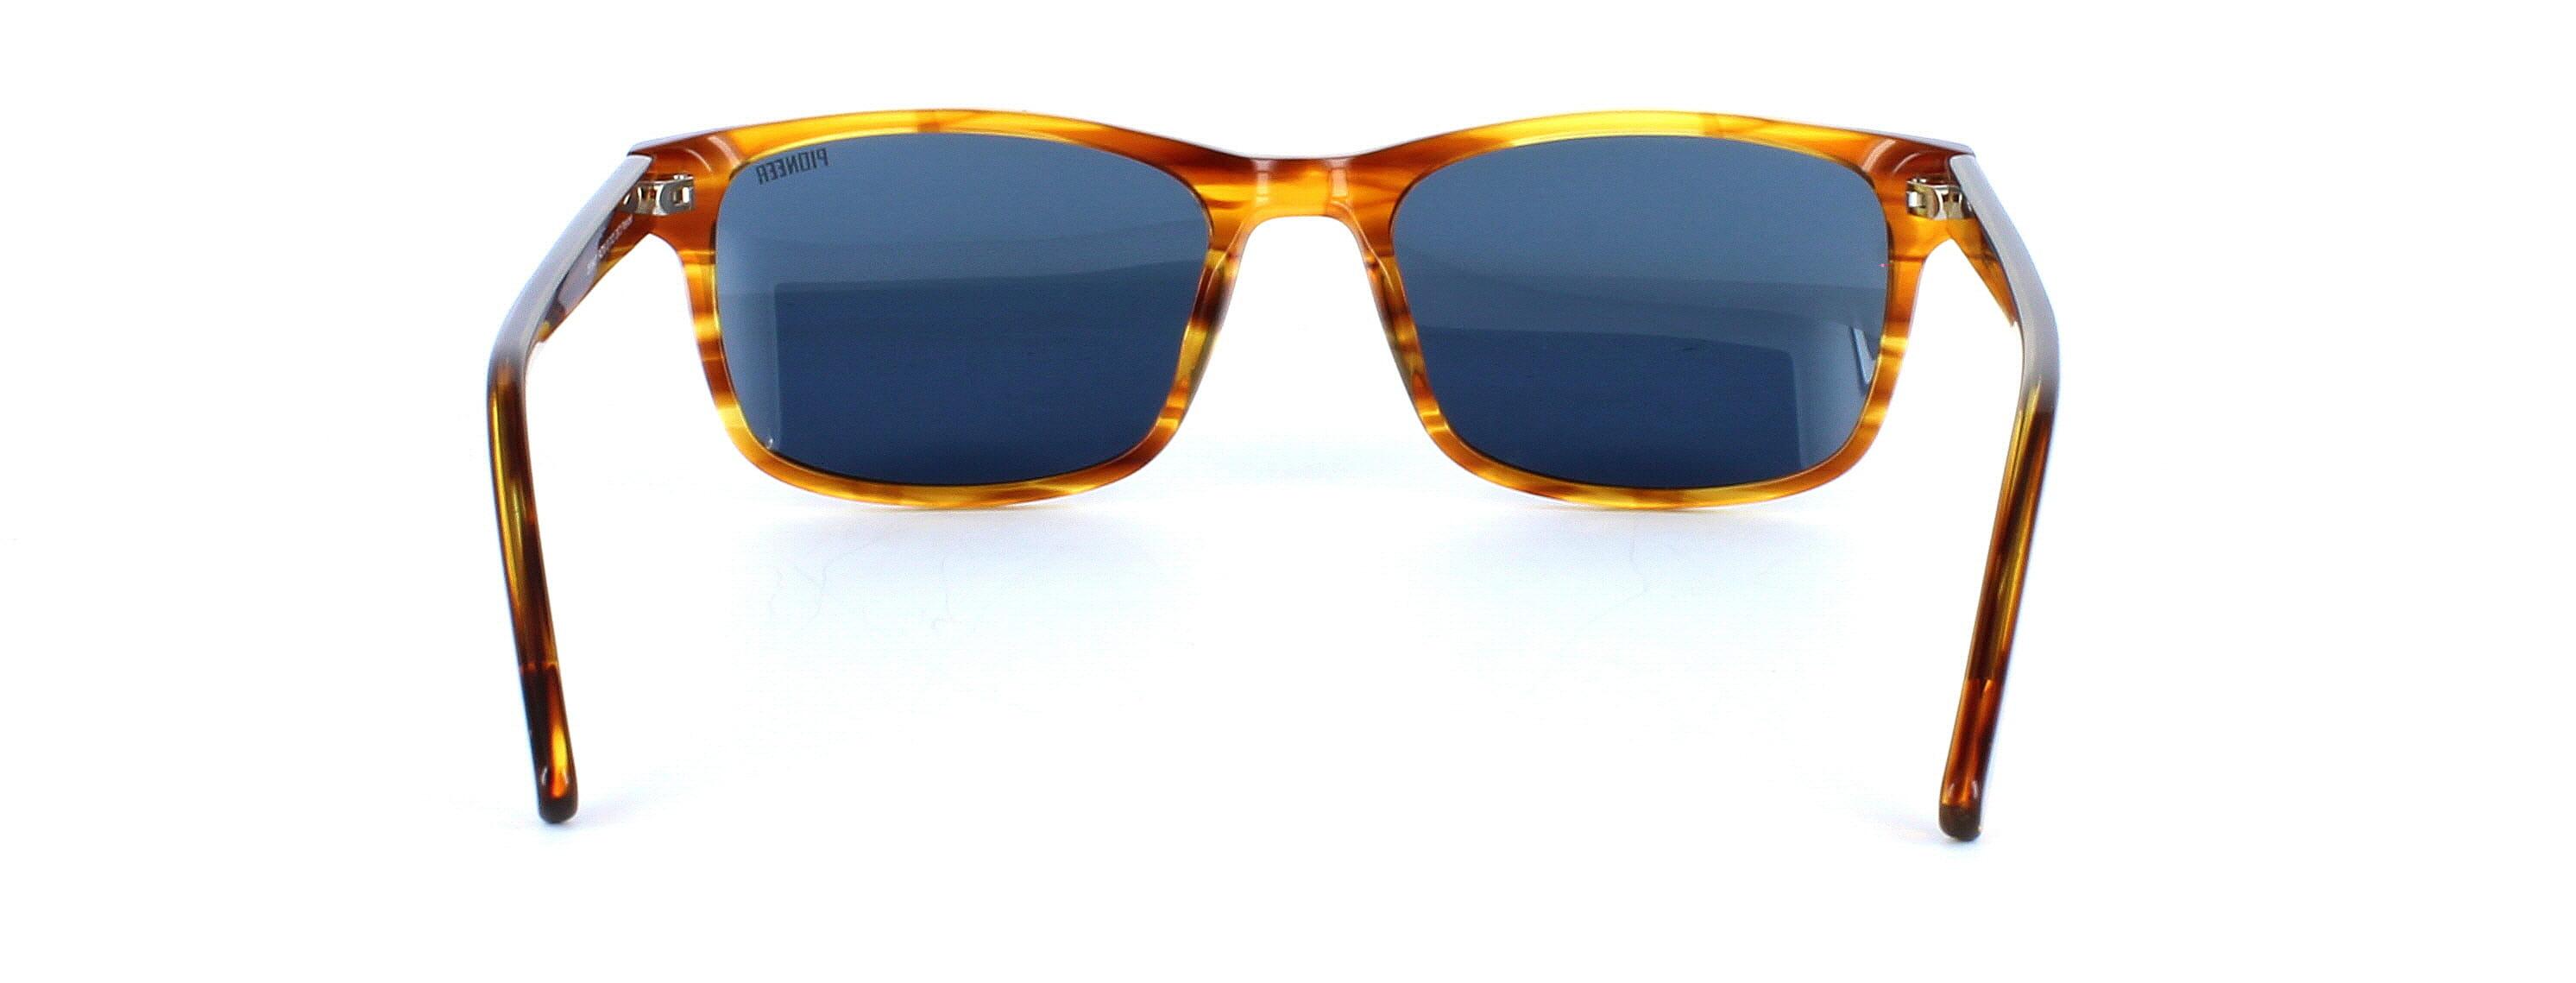 Rocco - Unisex acetate prescription sunglasses in tortoise - choose green, brown or grey tints inc in the price - image view 3